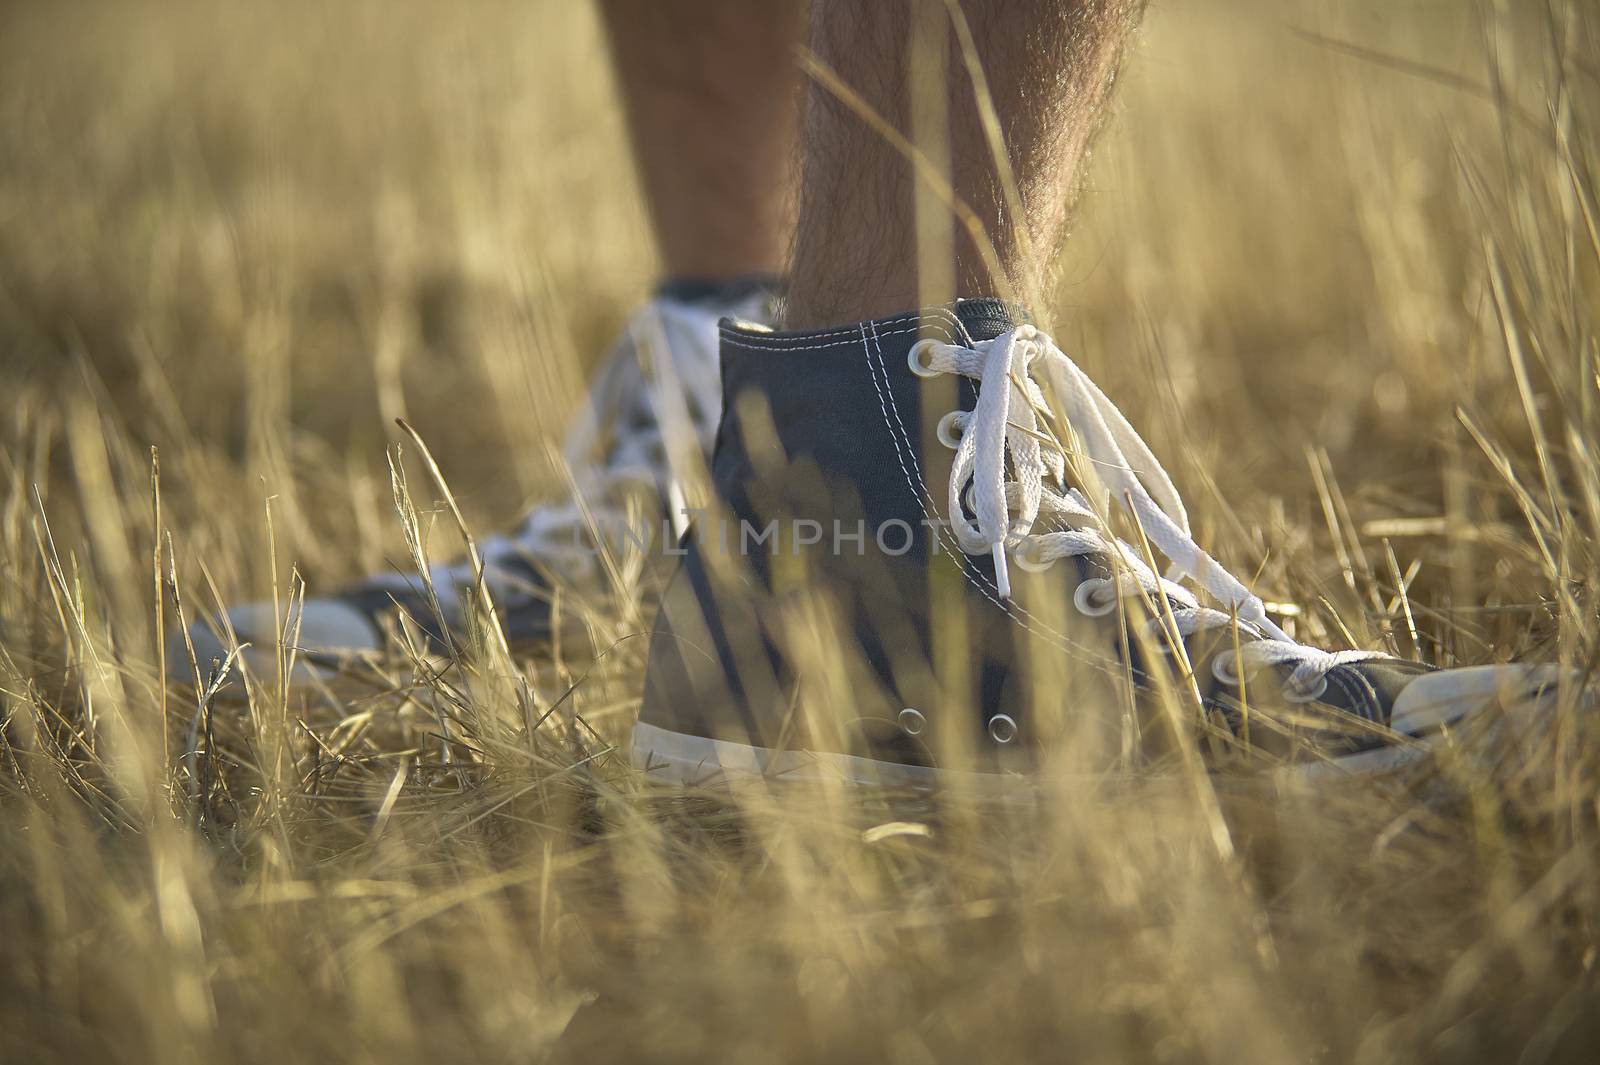 Shoe in the foreground with behind the other while being worn by a boy walking in the grass.